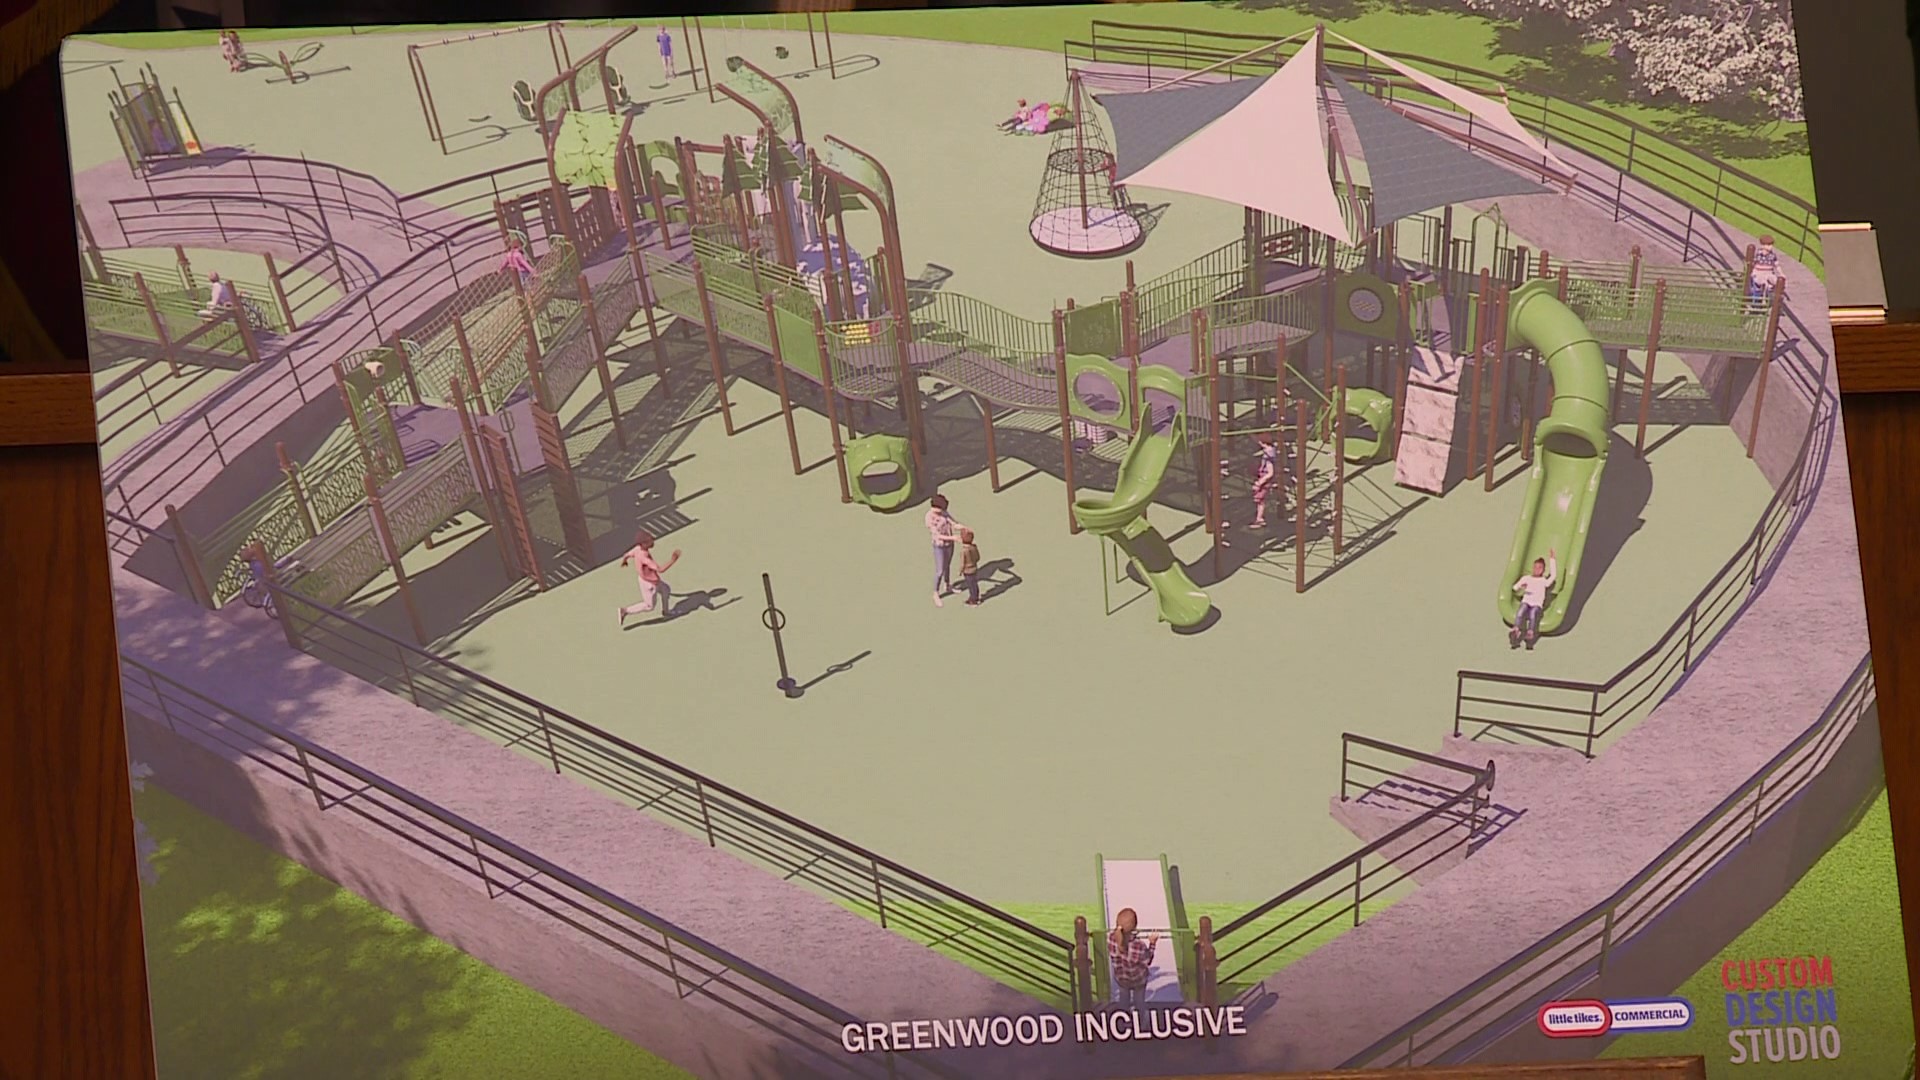 The project is still in the planning phase, but locals got to see a rendering of what the playground could look like.